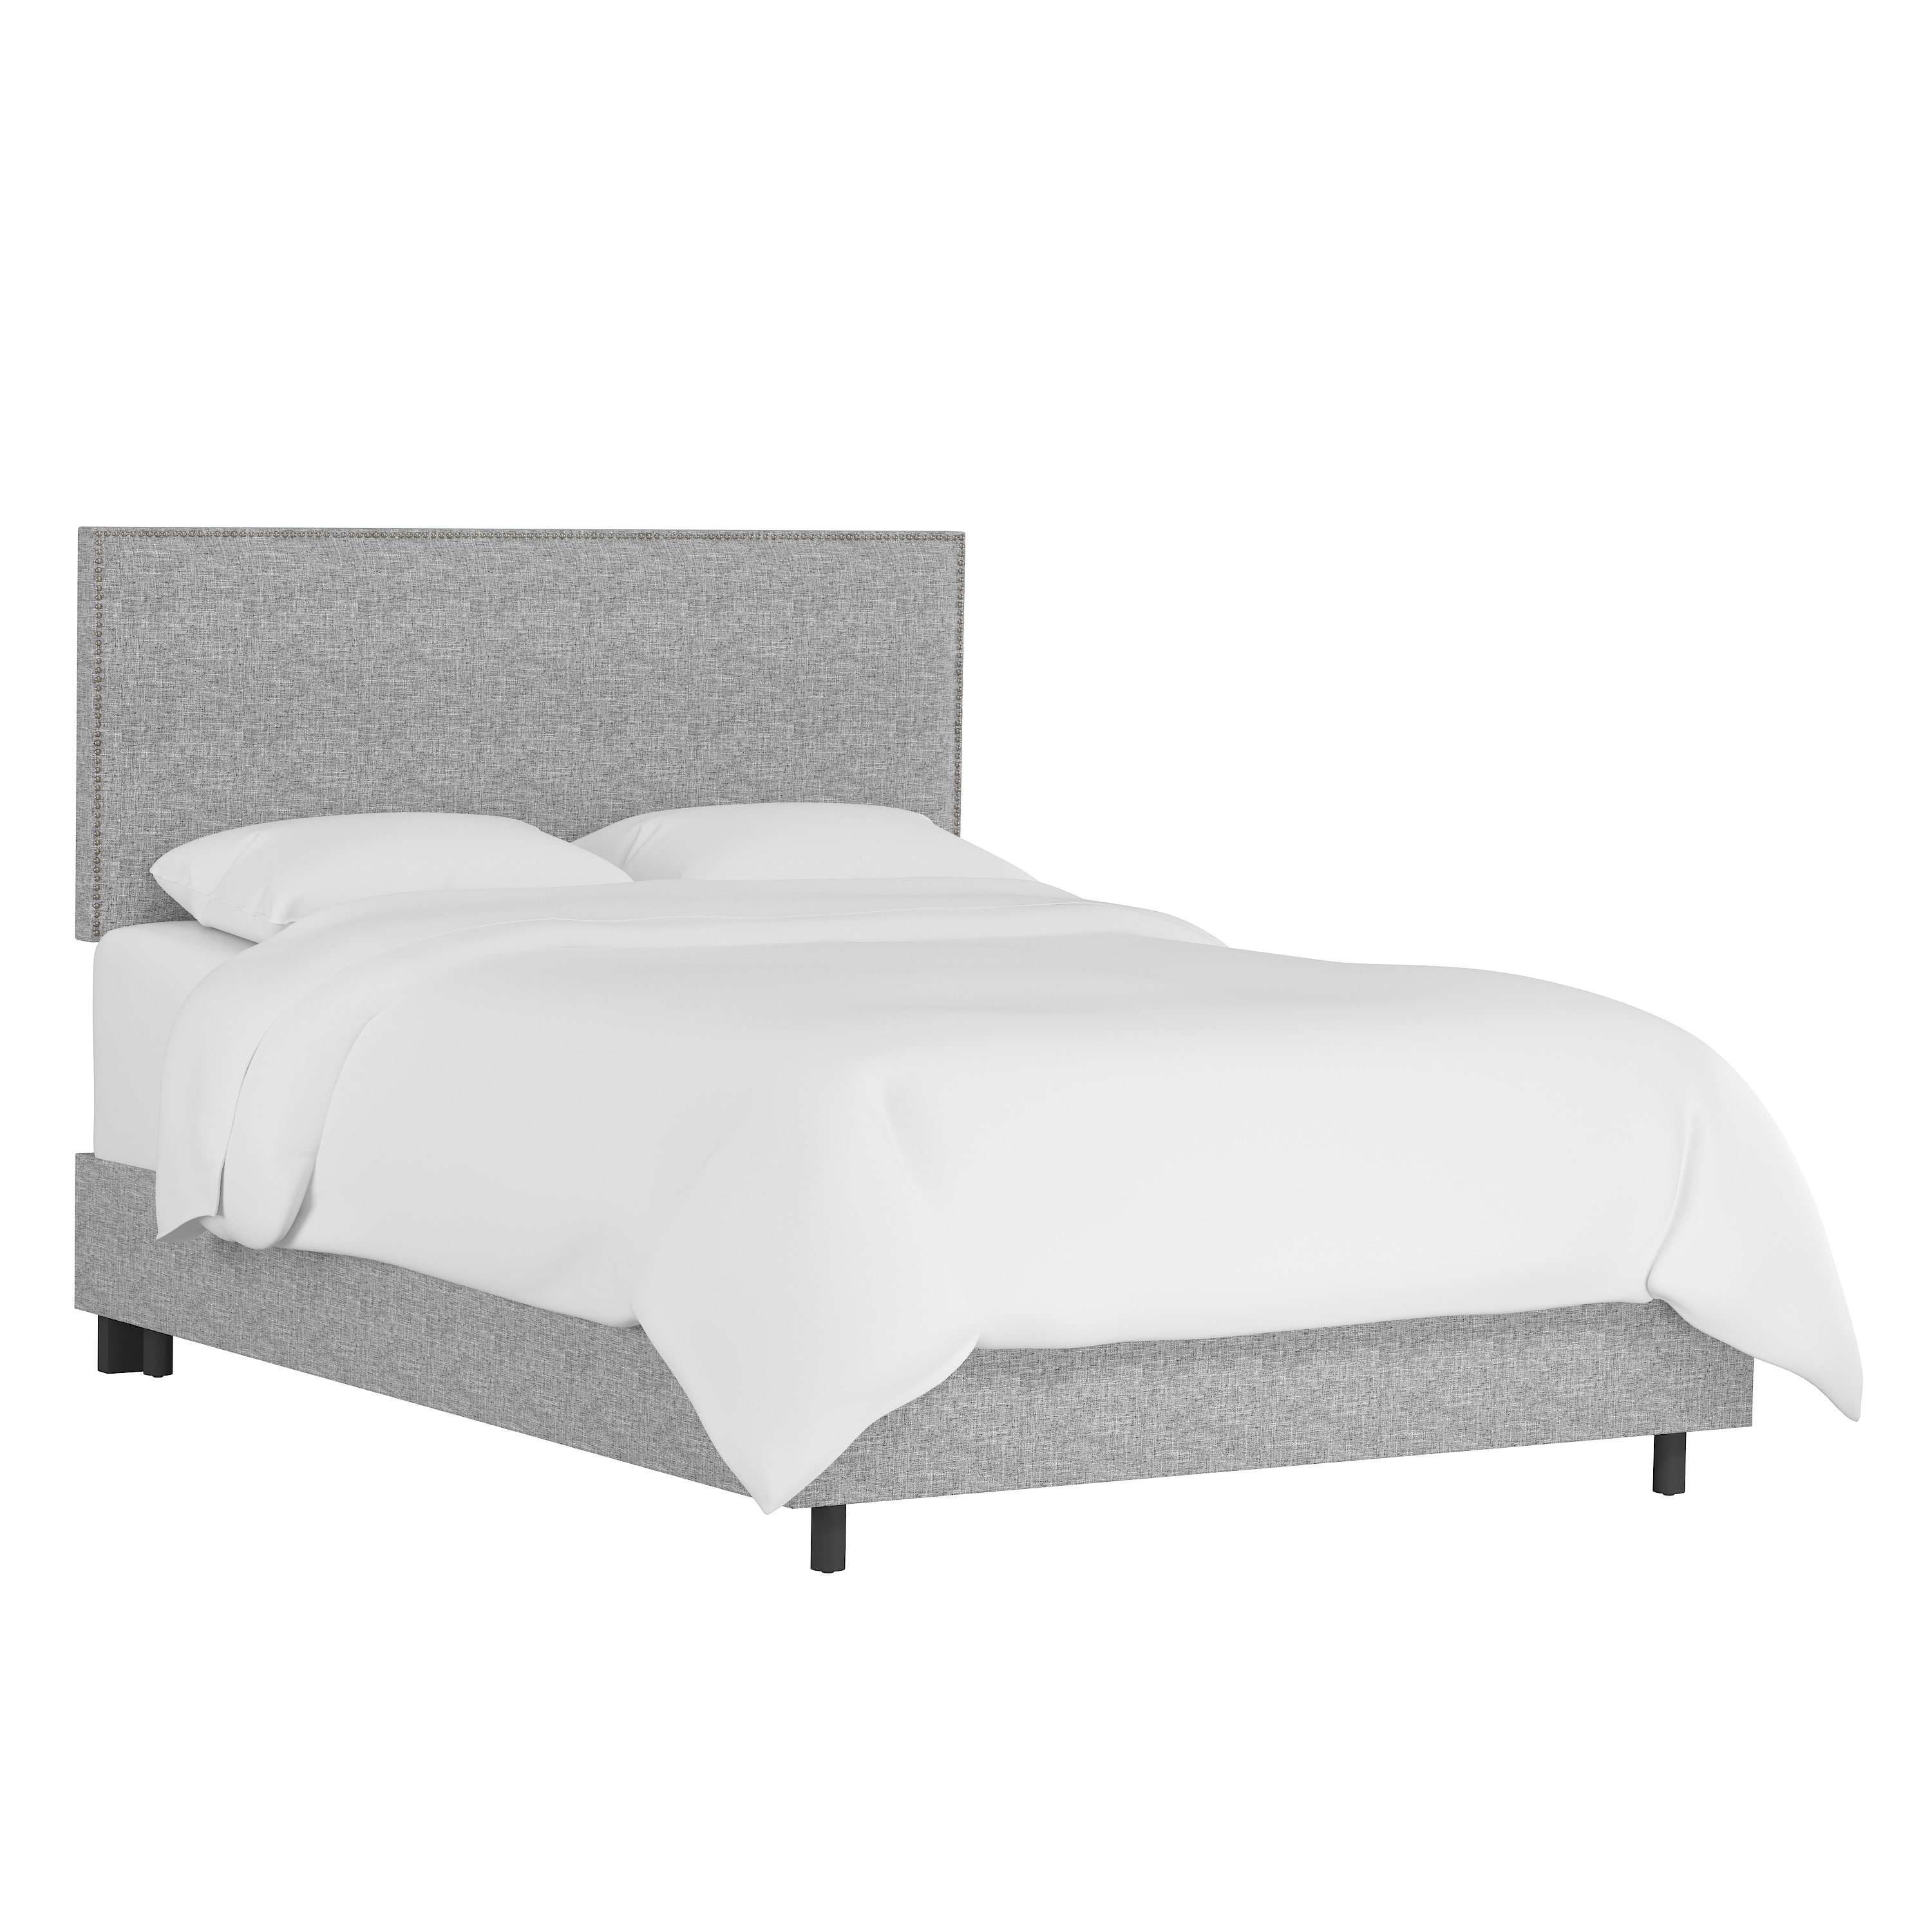 Ellsworth Bed, Twin, Pumice, Pewter Nailheads - Image 0